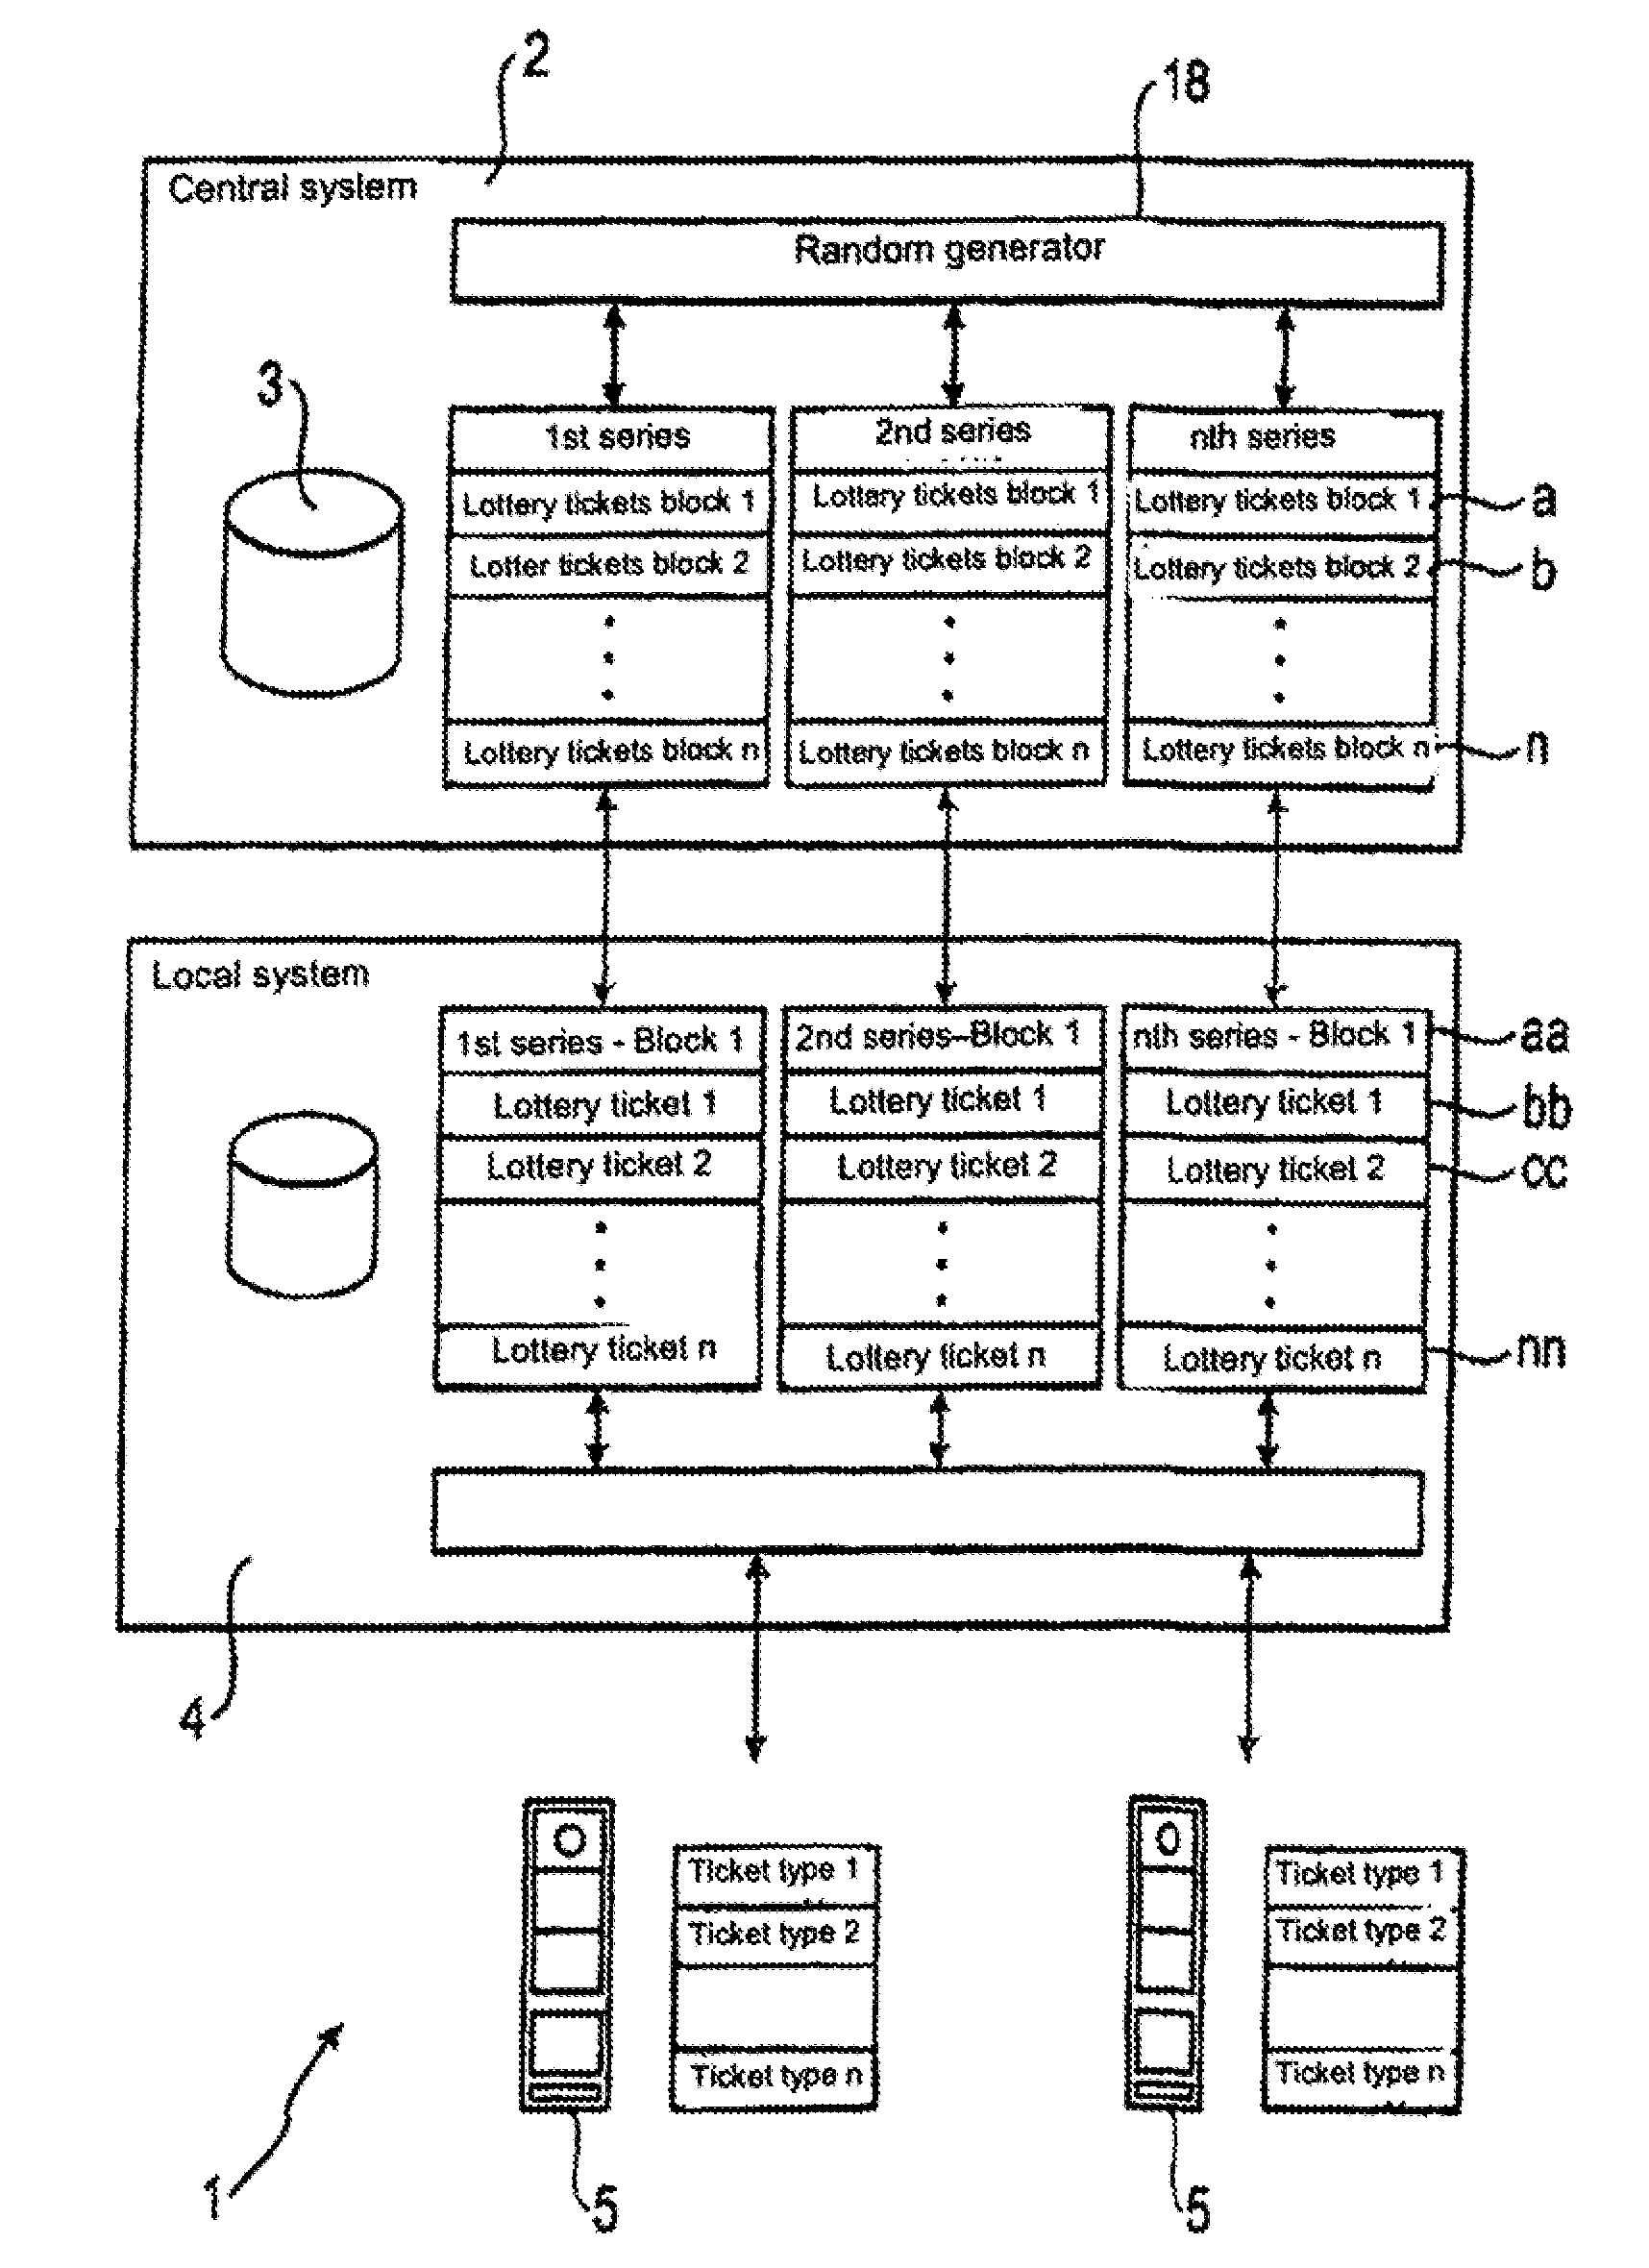 Electronic gaming device